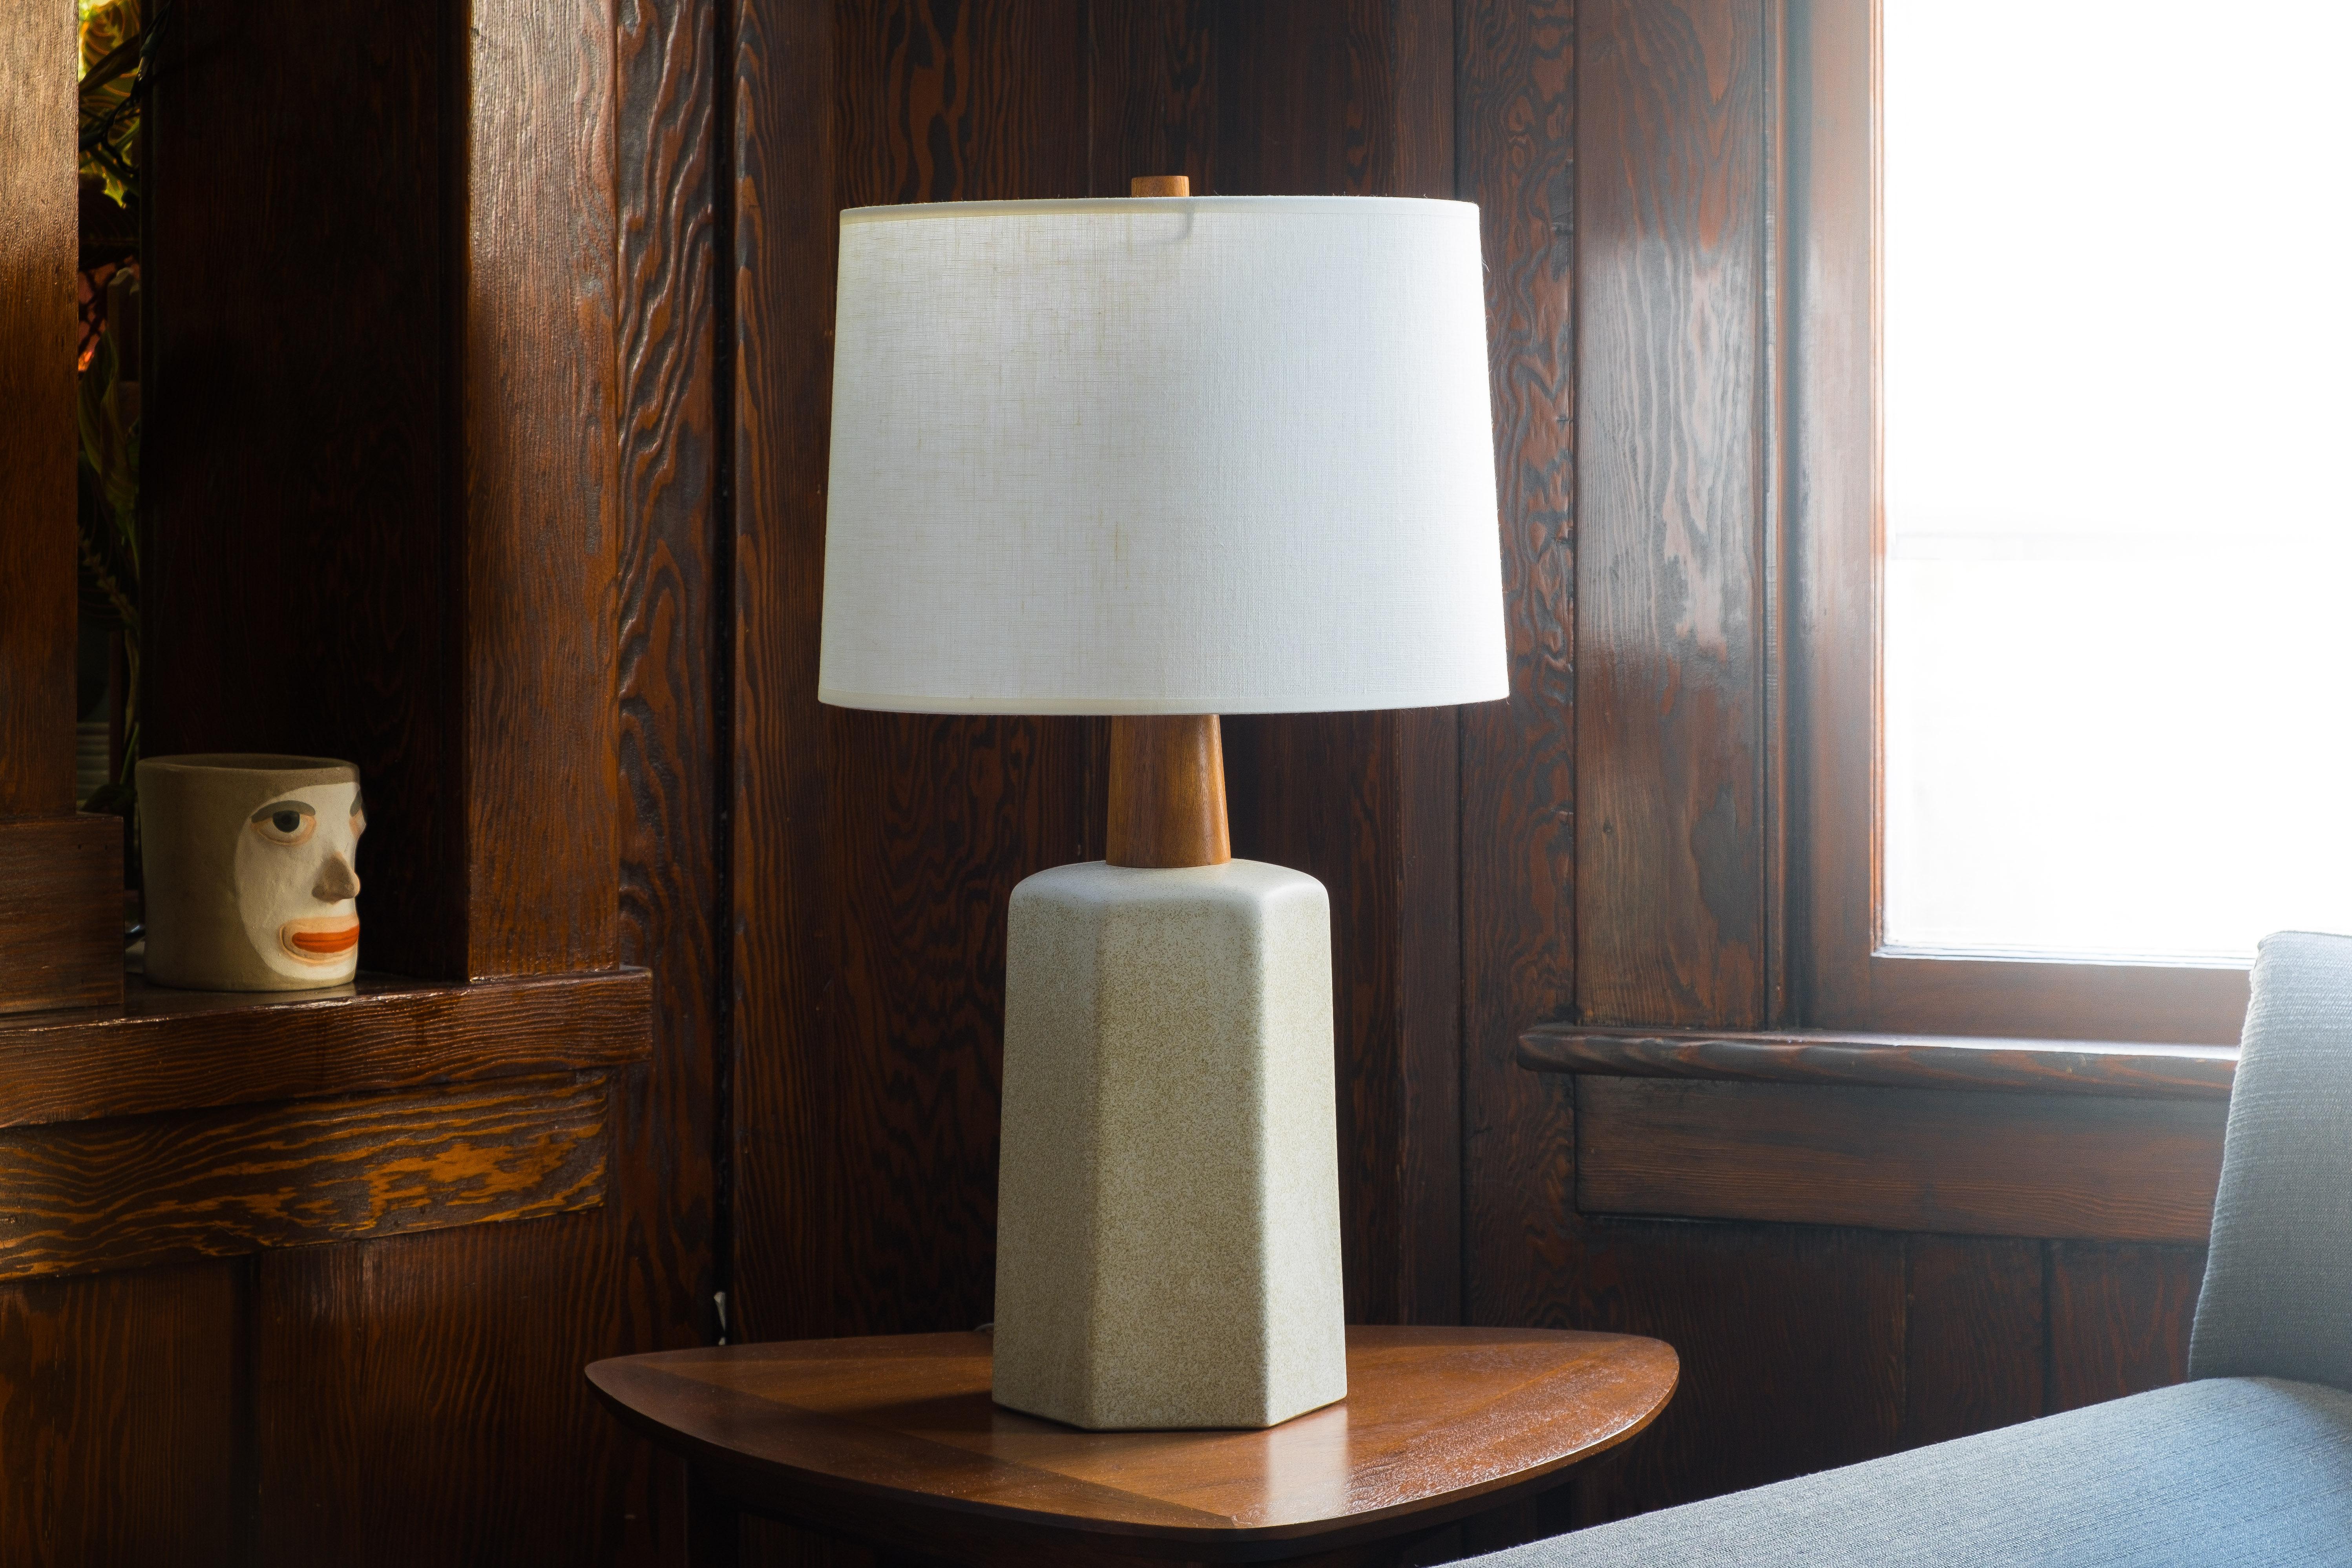 What is it?
—
This unusual Martz lamp comes in a matte cream glaze with embedded bits of sand. The body is a tapered hexagon shape with a top that rounds gently. The ceramic body gives way to a thick walnut neck and the whole ensemble is capped